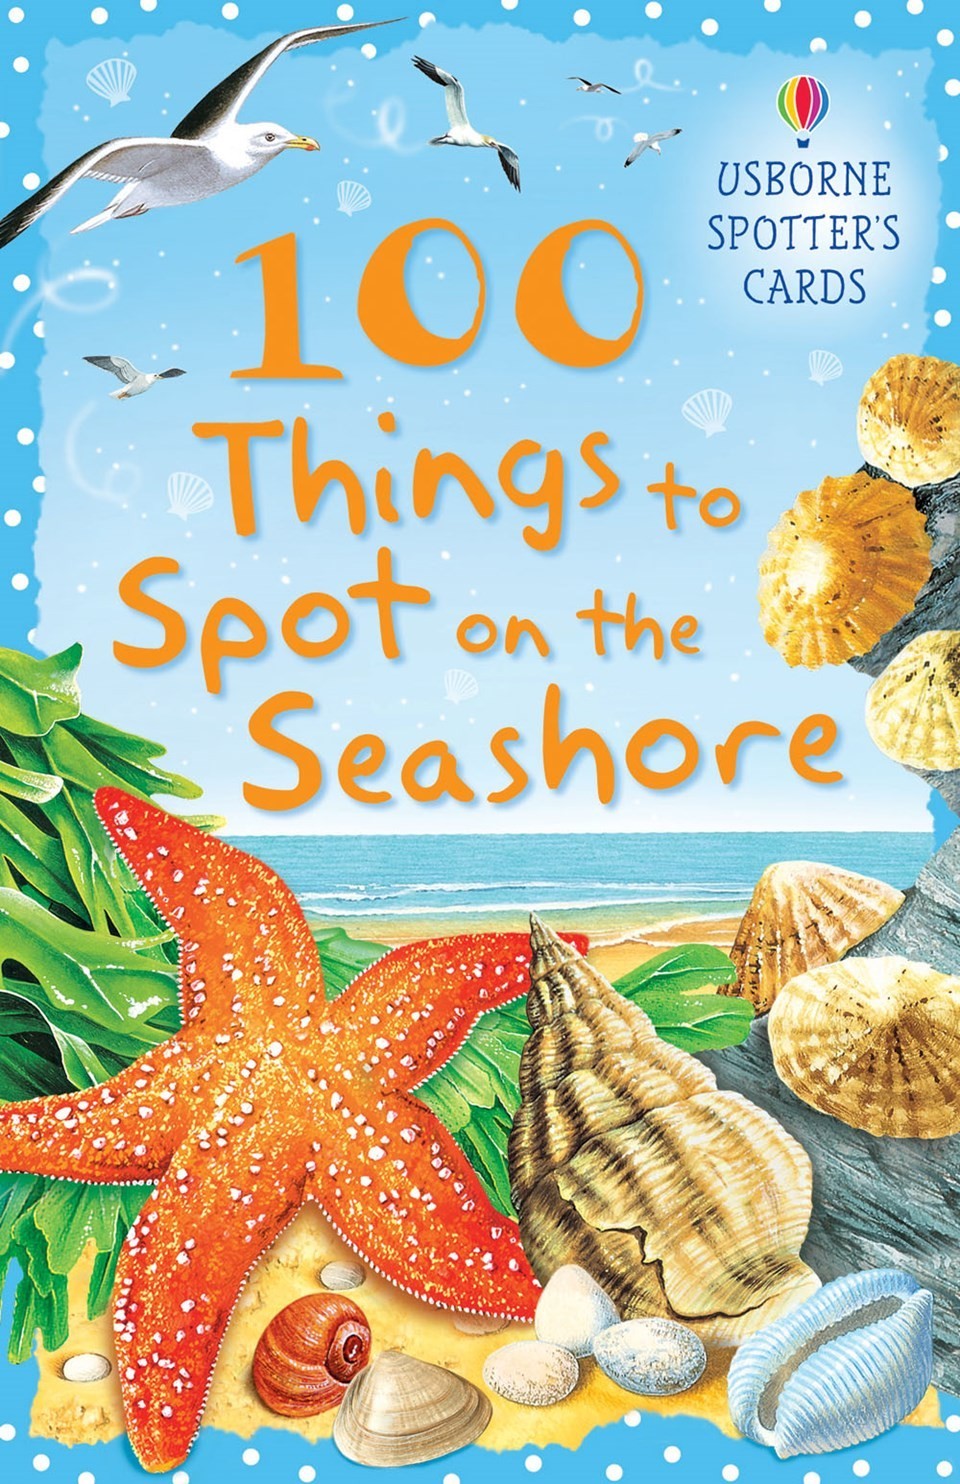 100 things to spot on the seashore